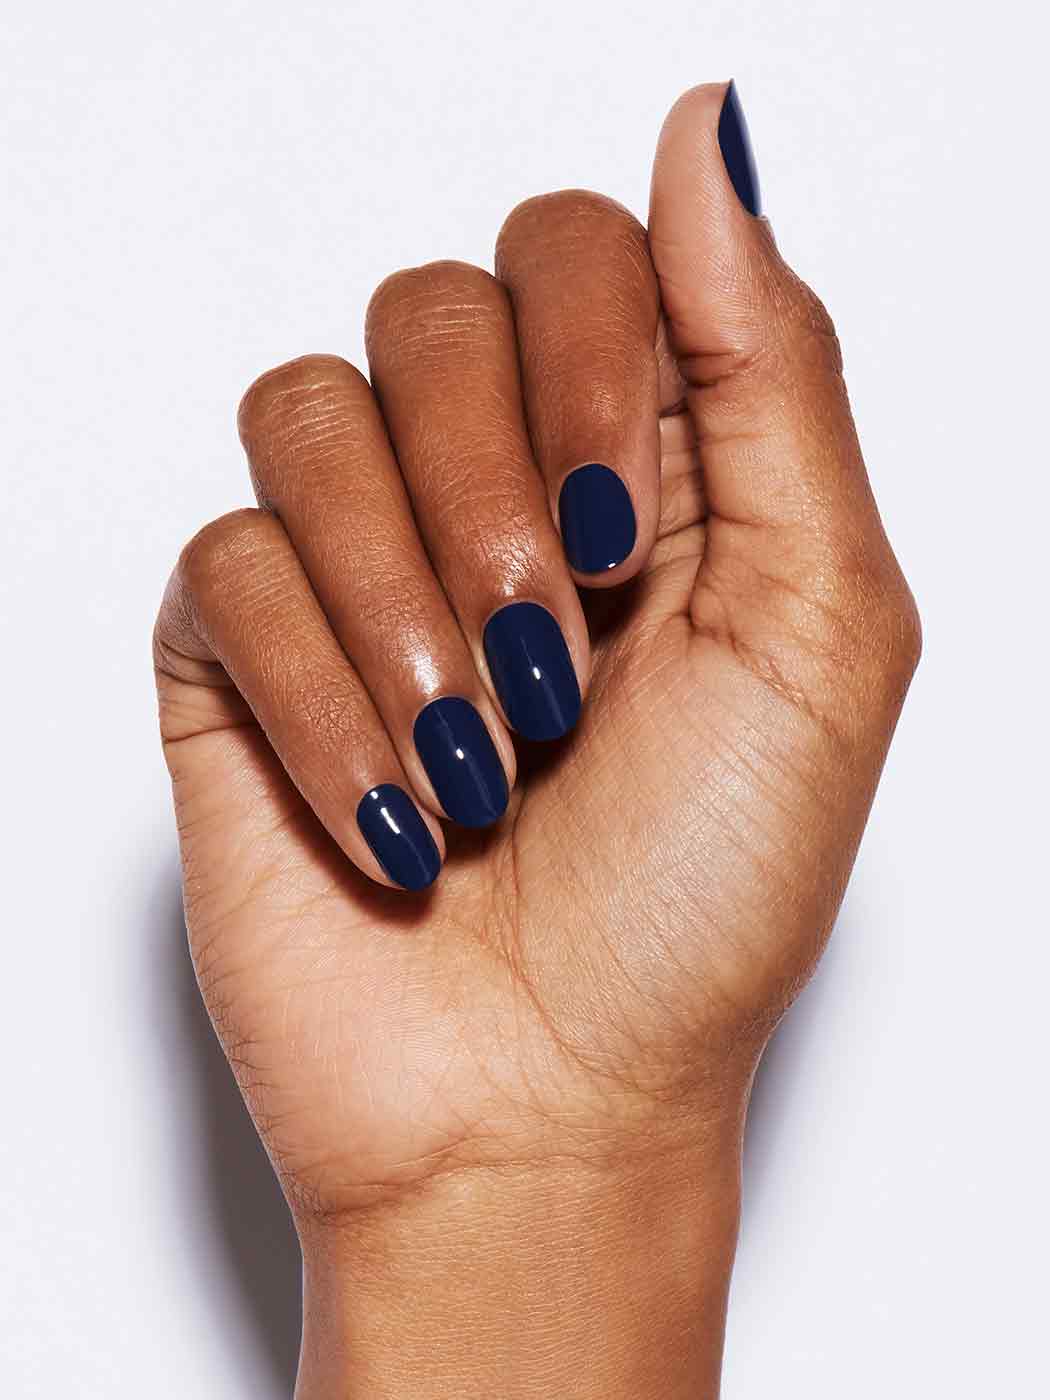 Cool toned navy blue, Full coverage, Rich